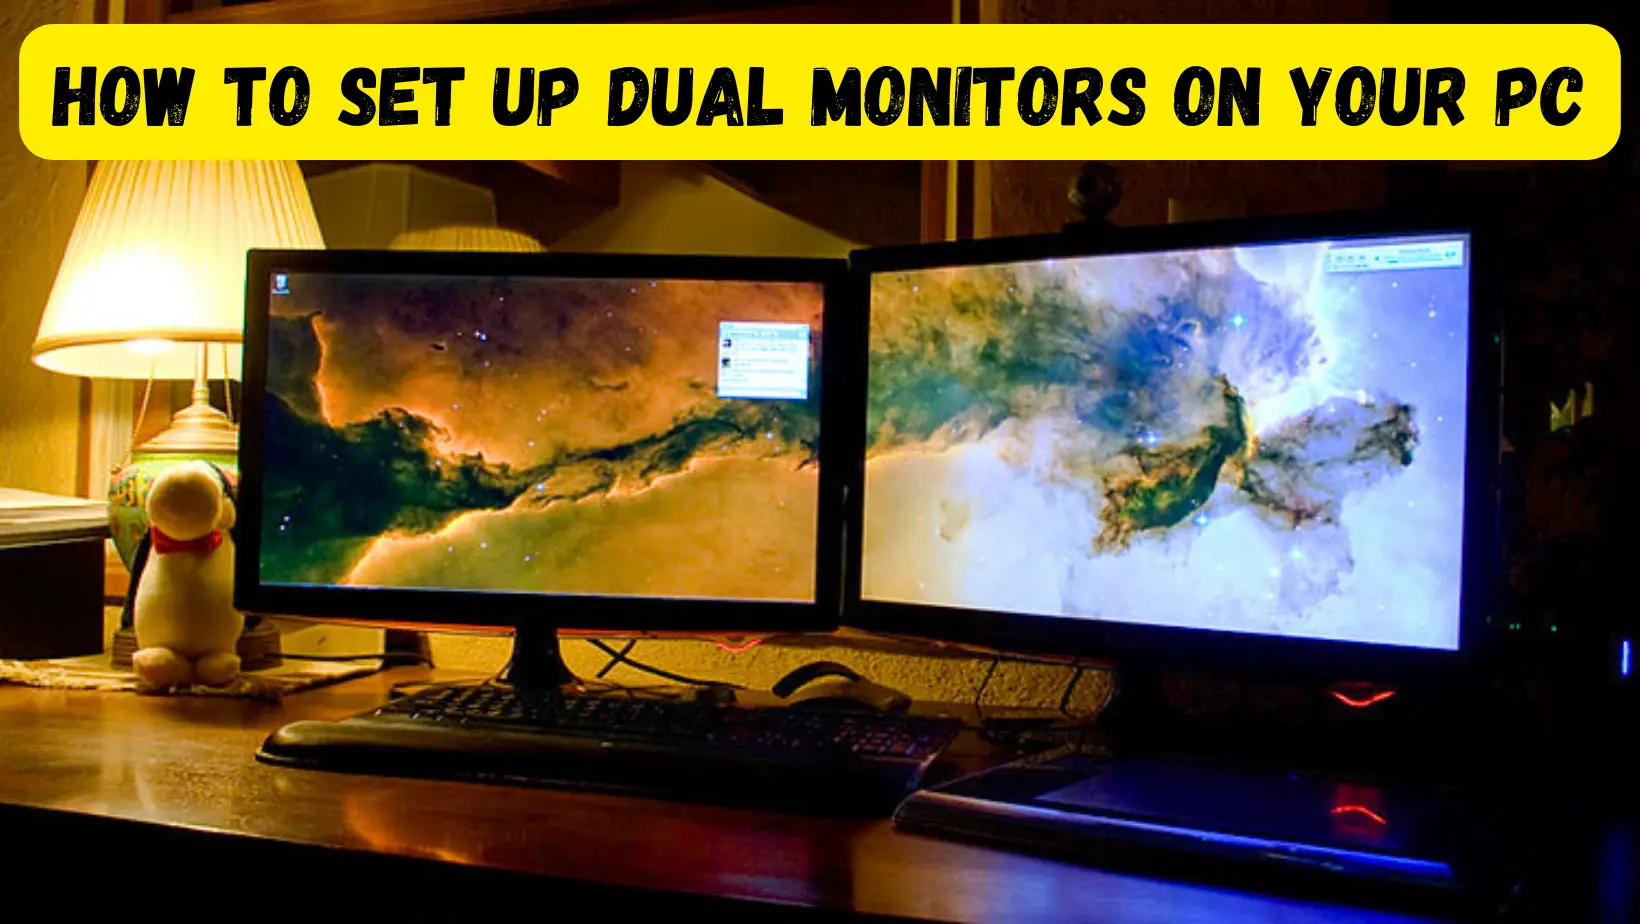 Dual Monitors on Your PC